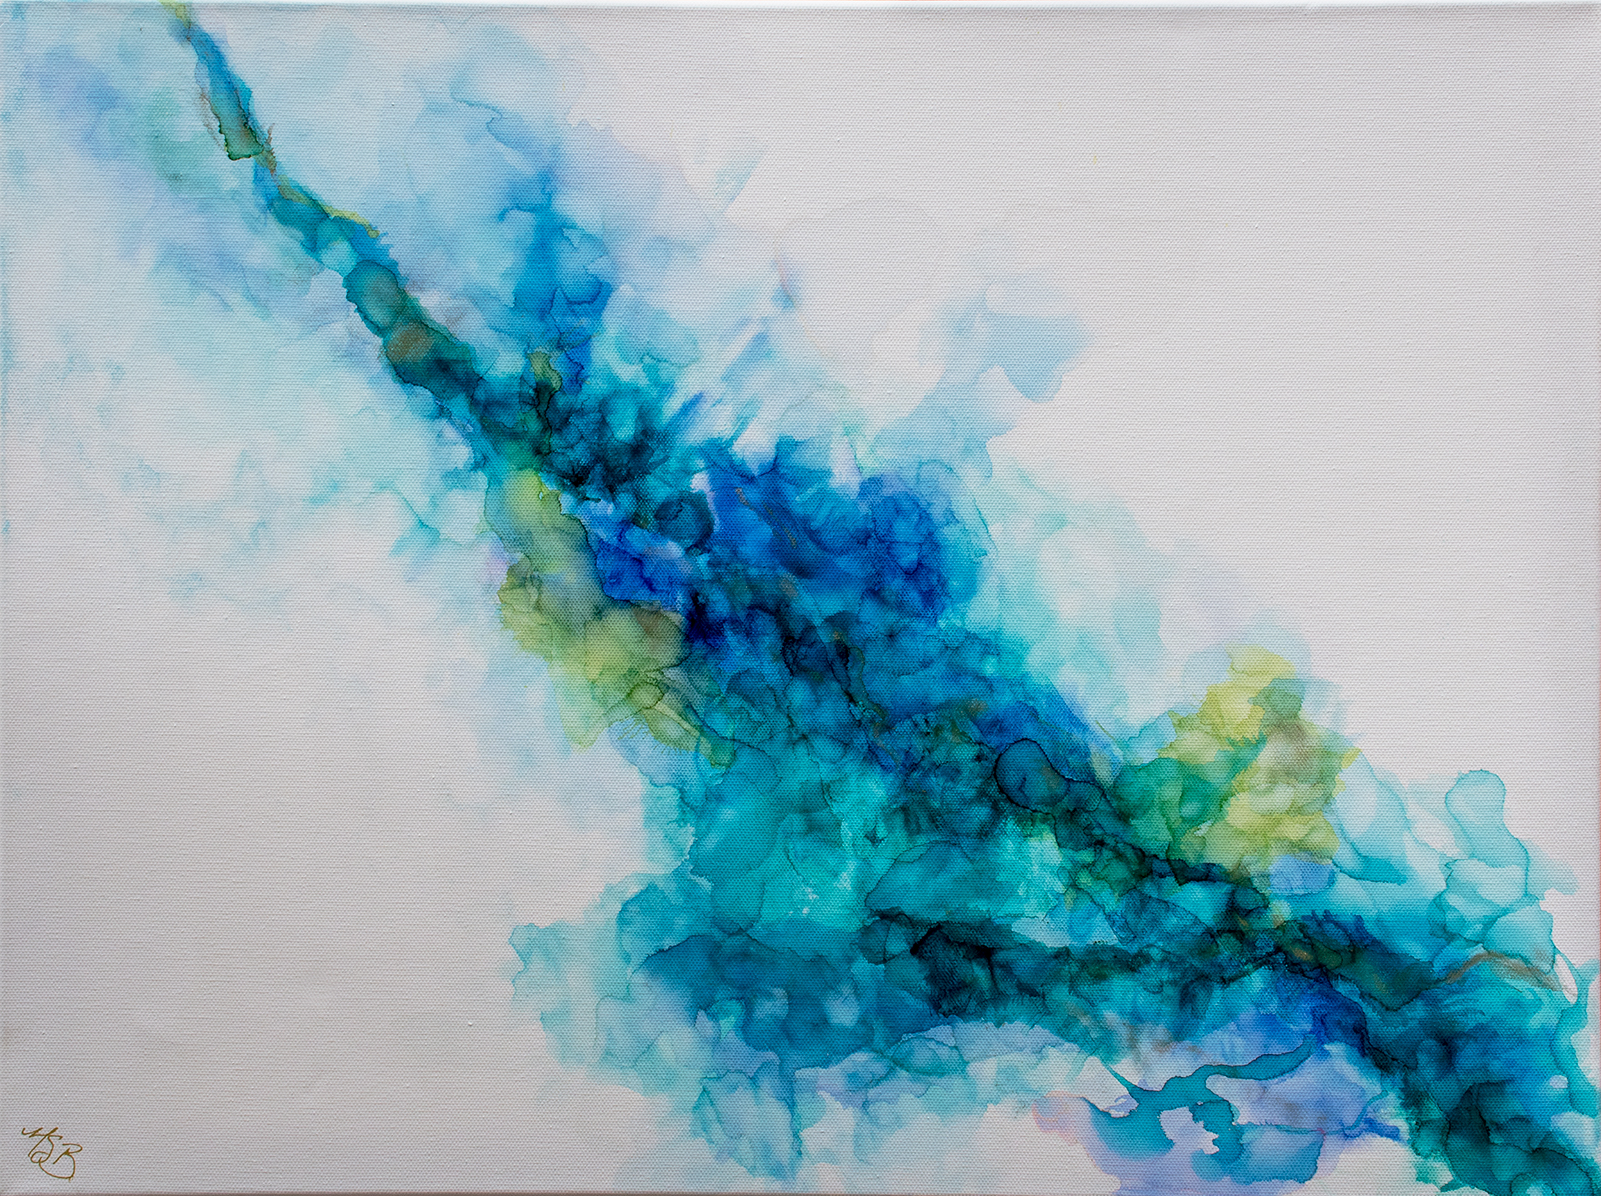 Abstract painting of teal, blue, and green with gold veins in alcohol ink on canvas by Mary Benke